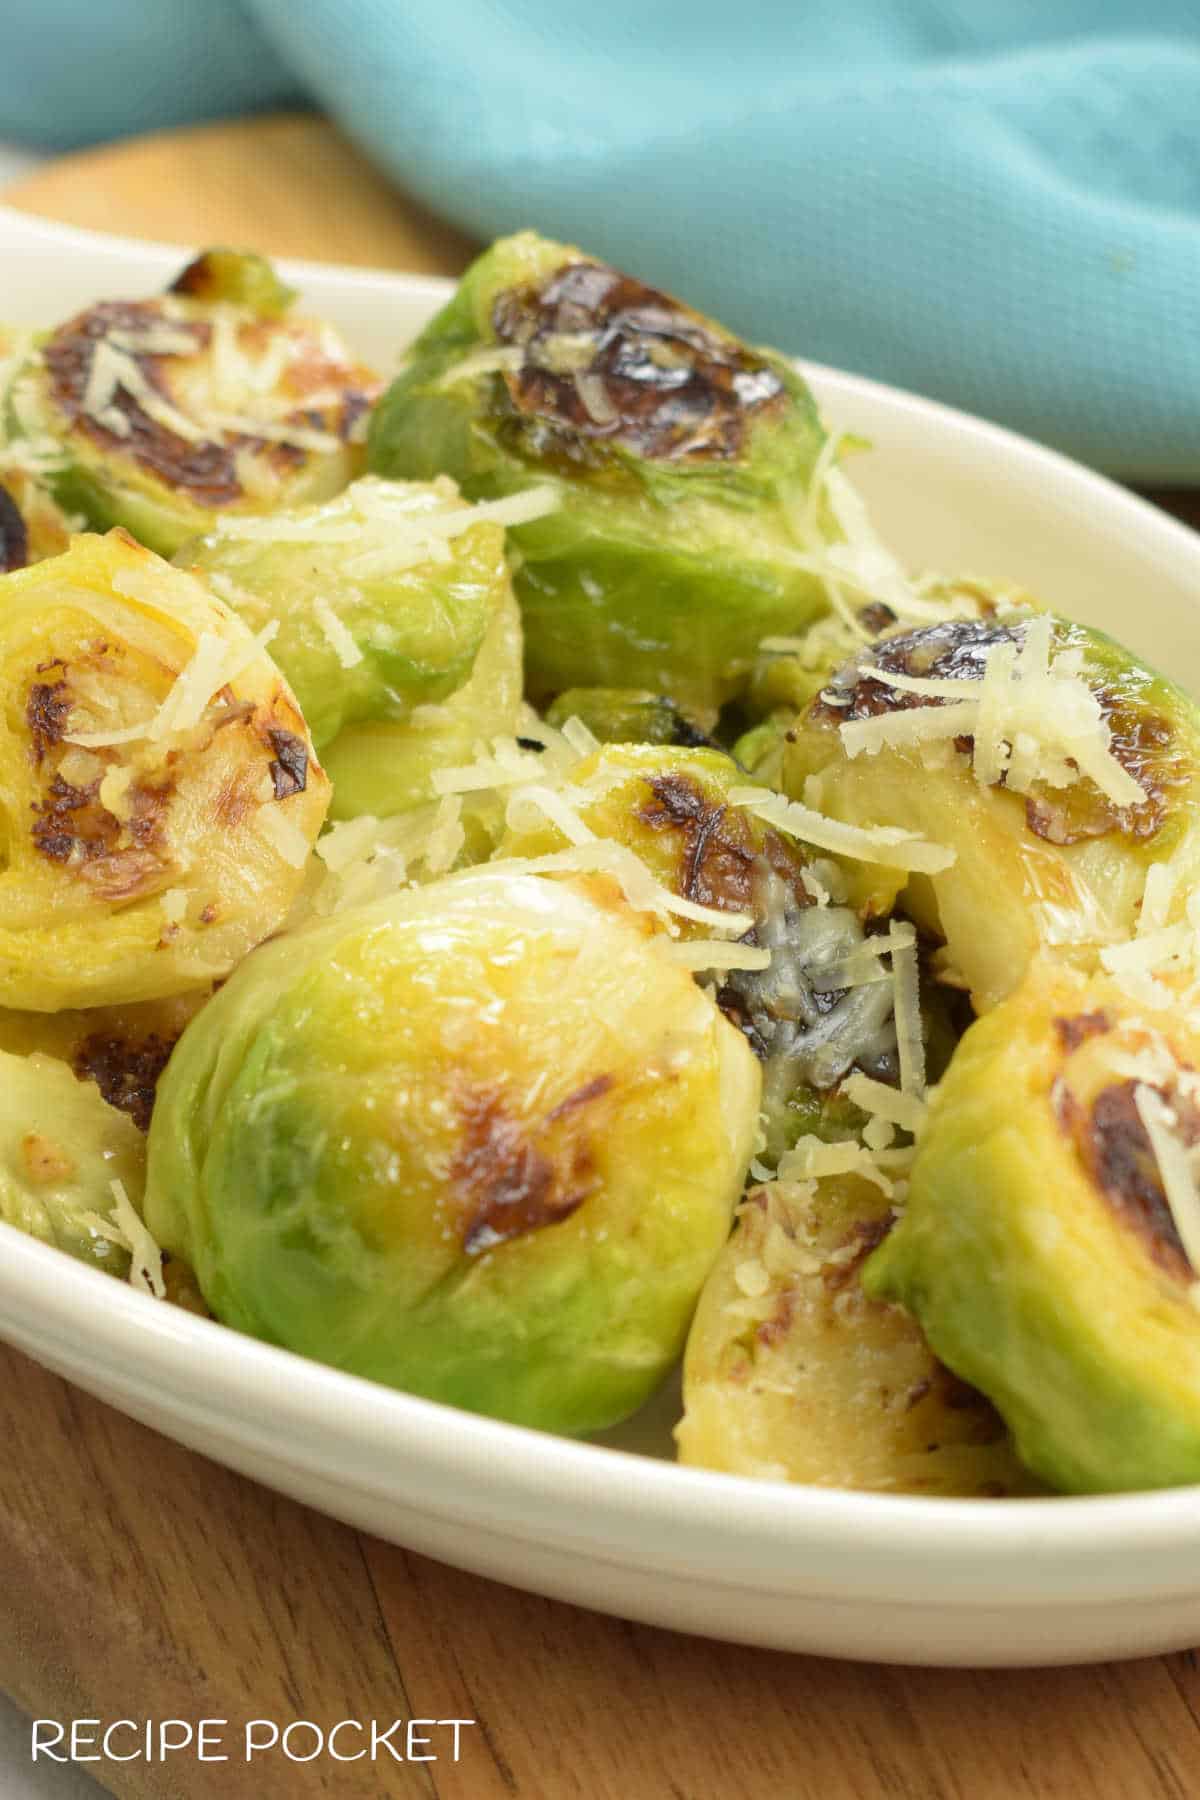 A serving dish the Brussel sprouts on a wooden board.